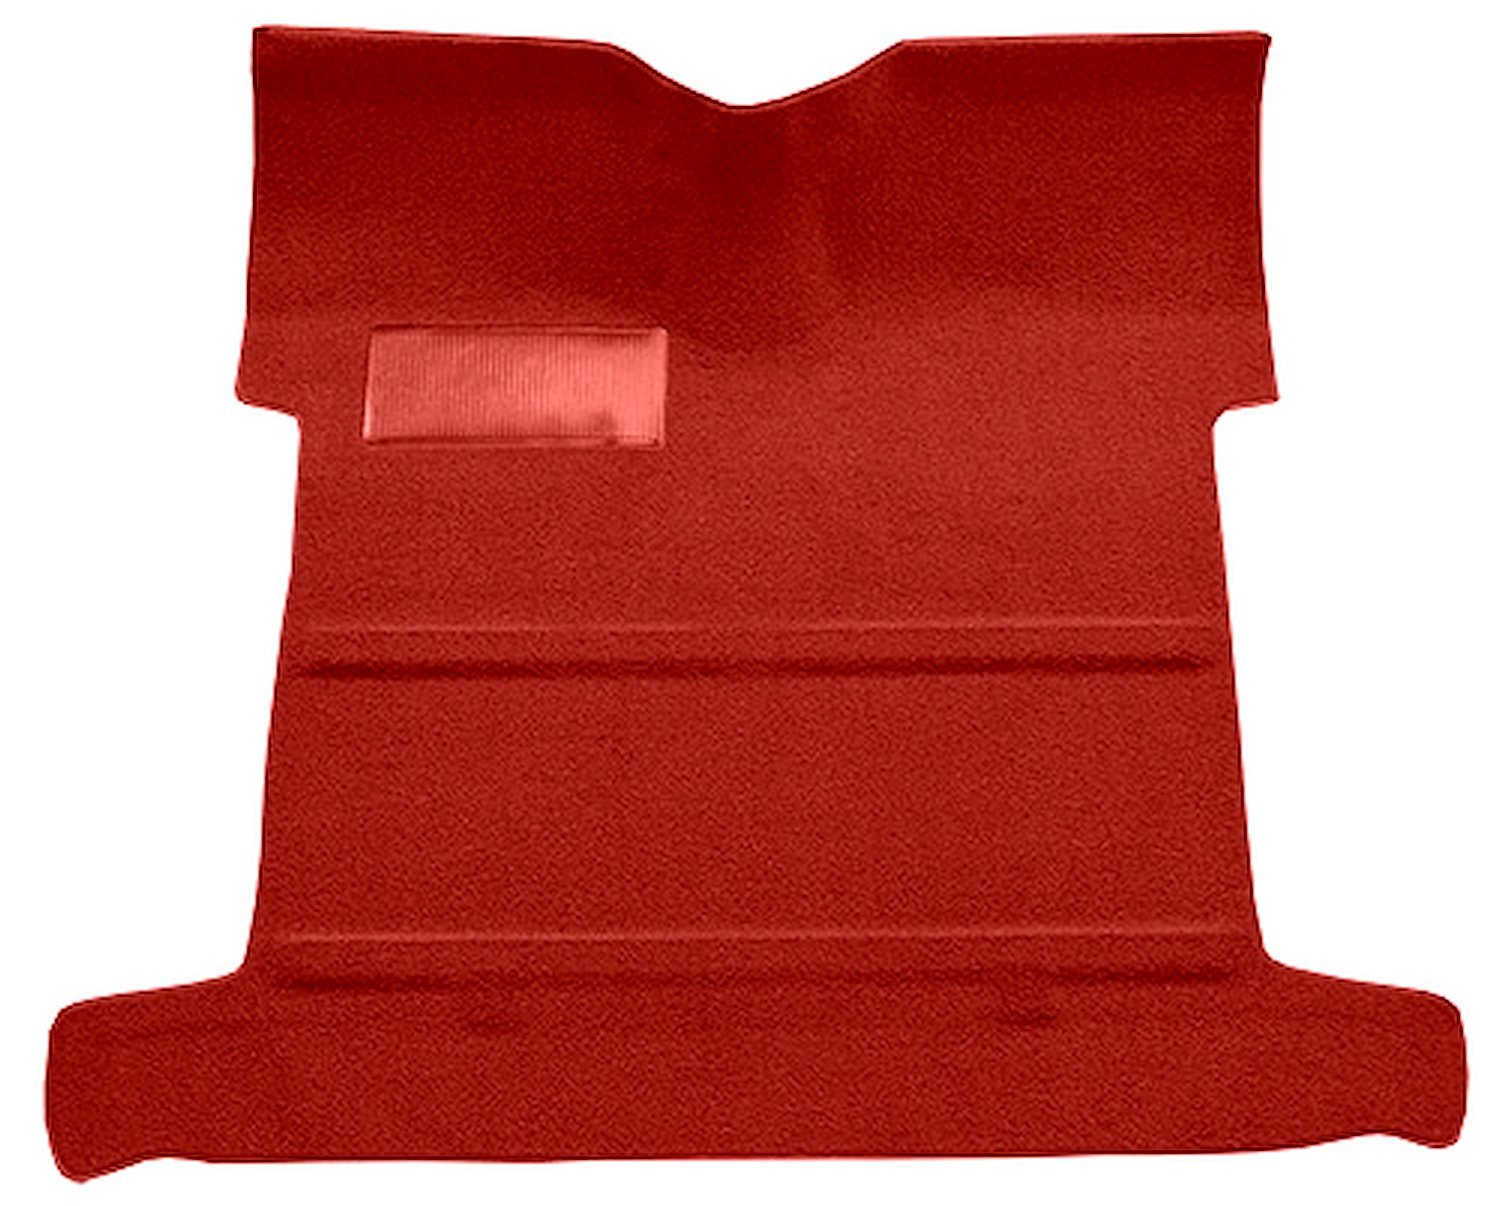 Molded Loop Carpet for 1959 GM 3100 Regular Cab Trucks w/Low Tunnel [Mass Backing, Red]